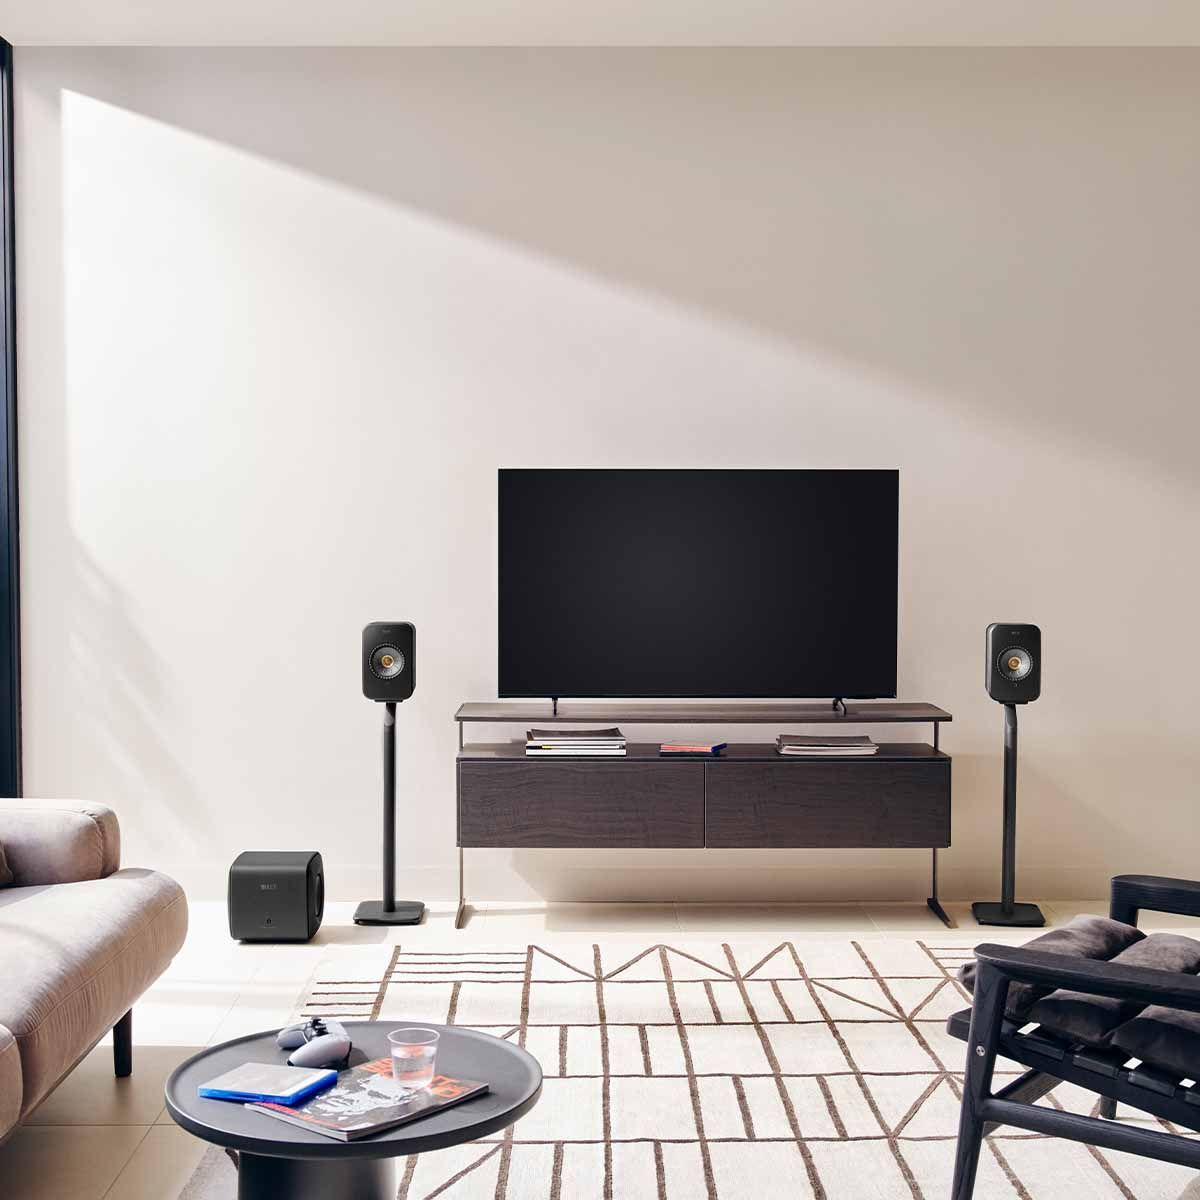 KEF LSX II Wireless HiFi Speakers - on floor stands with TV and subwoofer